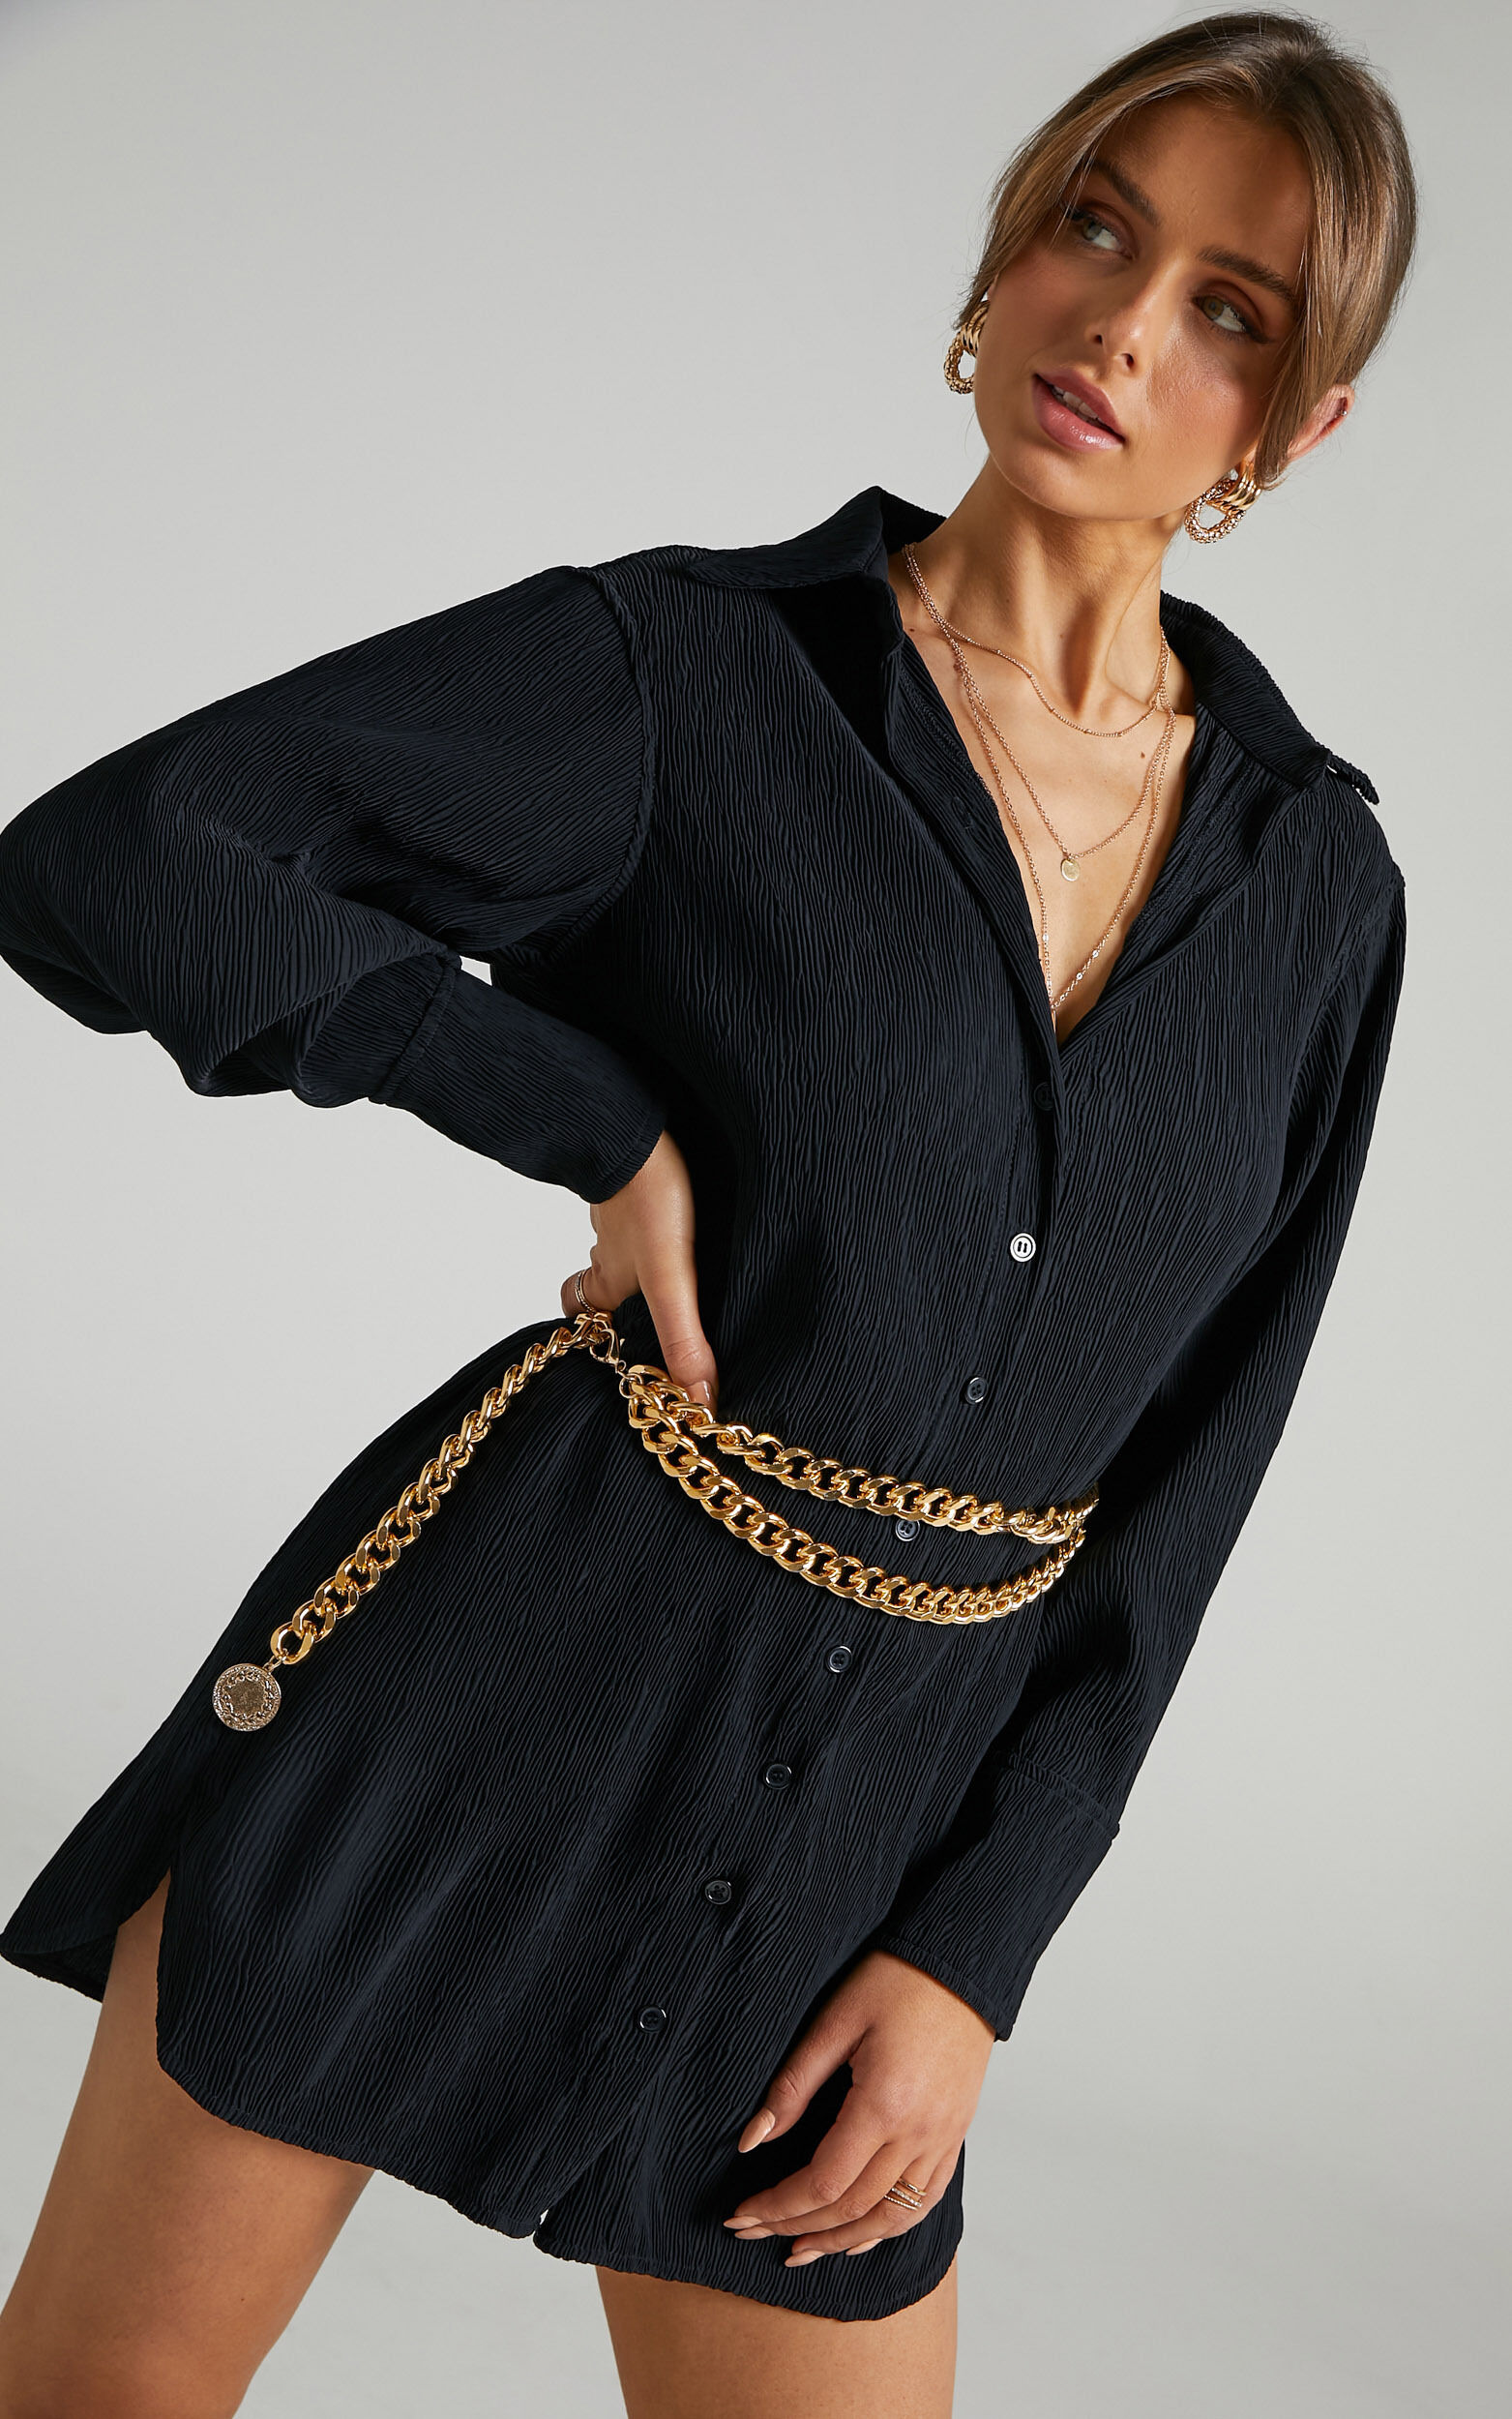 Simae Textured Button Up Shirt Dress in Black - 04, BLK1, super-hi-res image number null